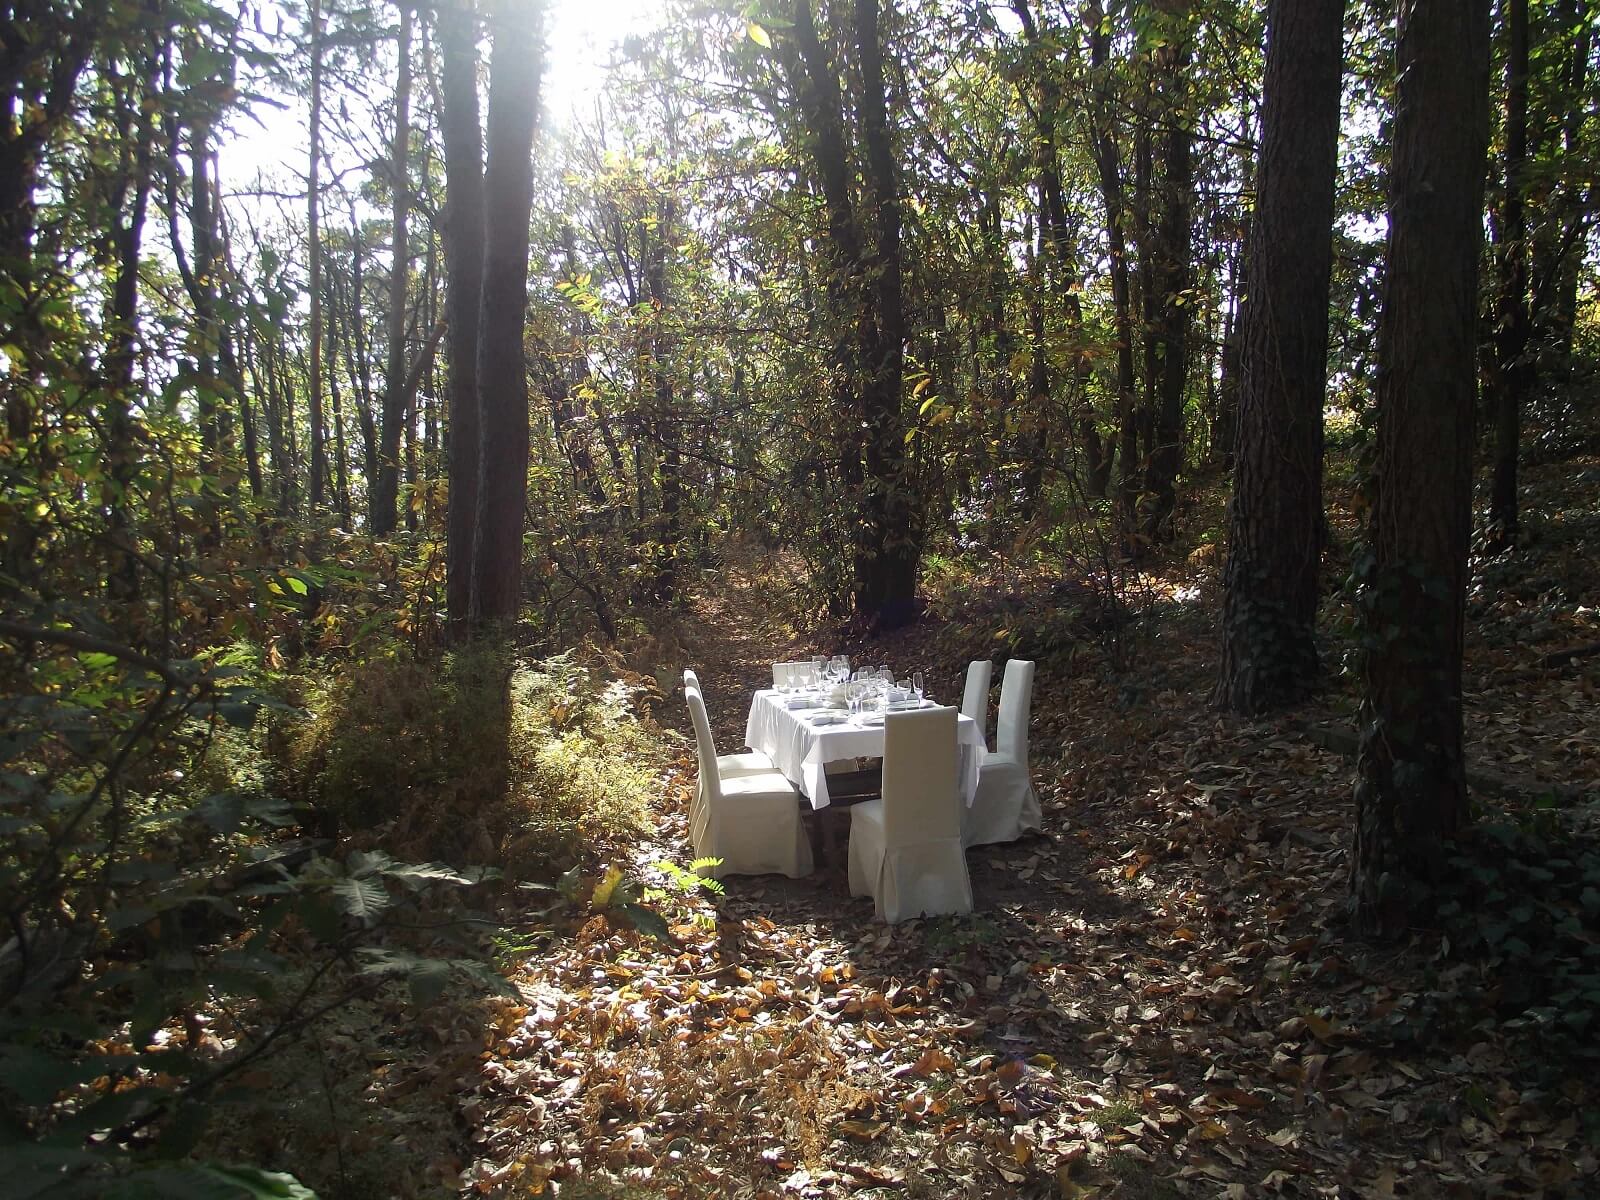 Your table in the wood is waiting!